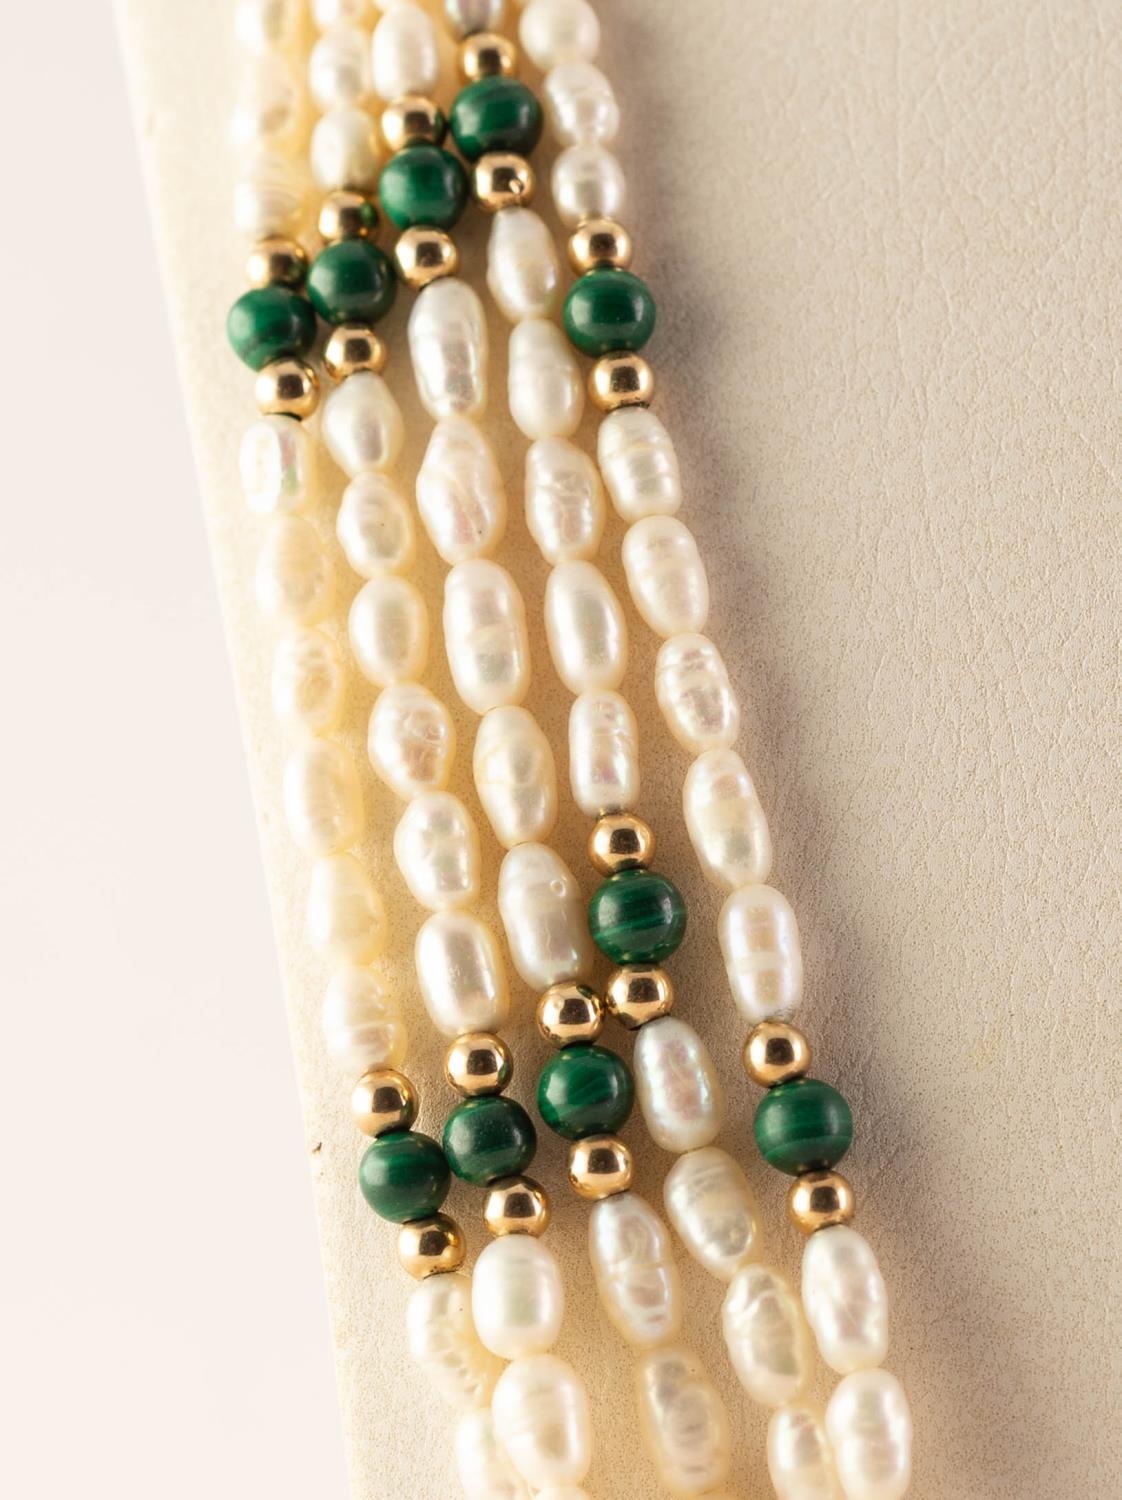 MULTI-STRAND FRESHWATER PEARL NECKLACE with 14K gold clasp and with gold and malachite bead spacers - Image 2 of 3